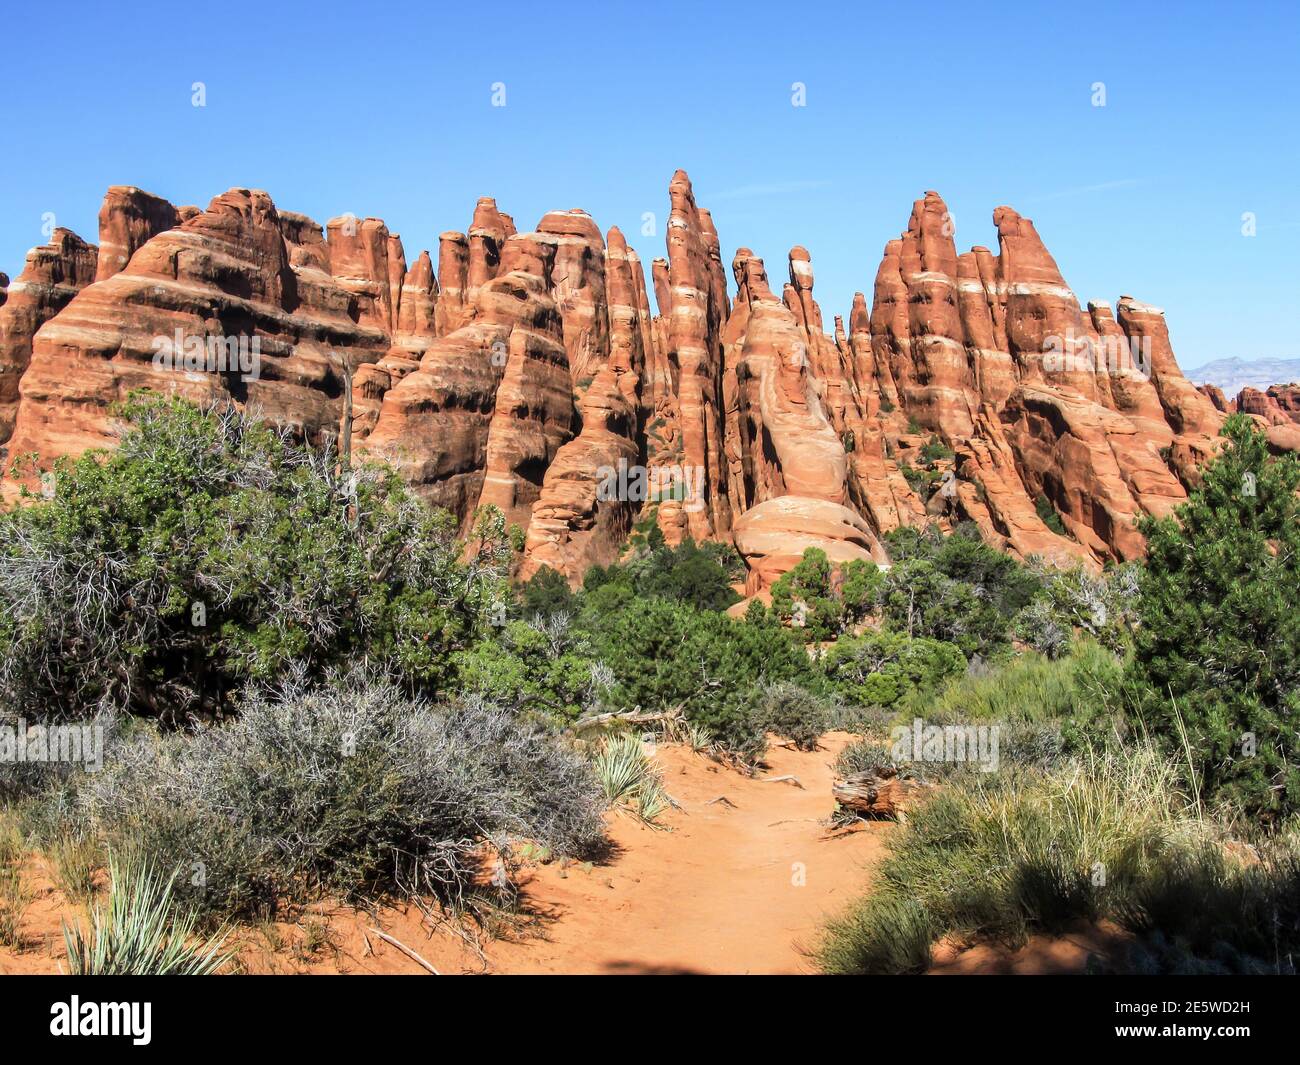 Delicate Sandstone fins and spires in the Devil’s garden section of Arches National Park, Utah, USA, on a sunny day Stock Photo